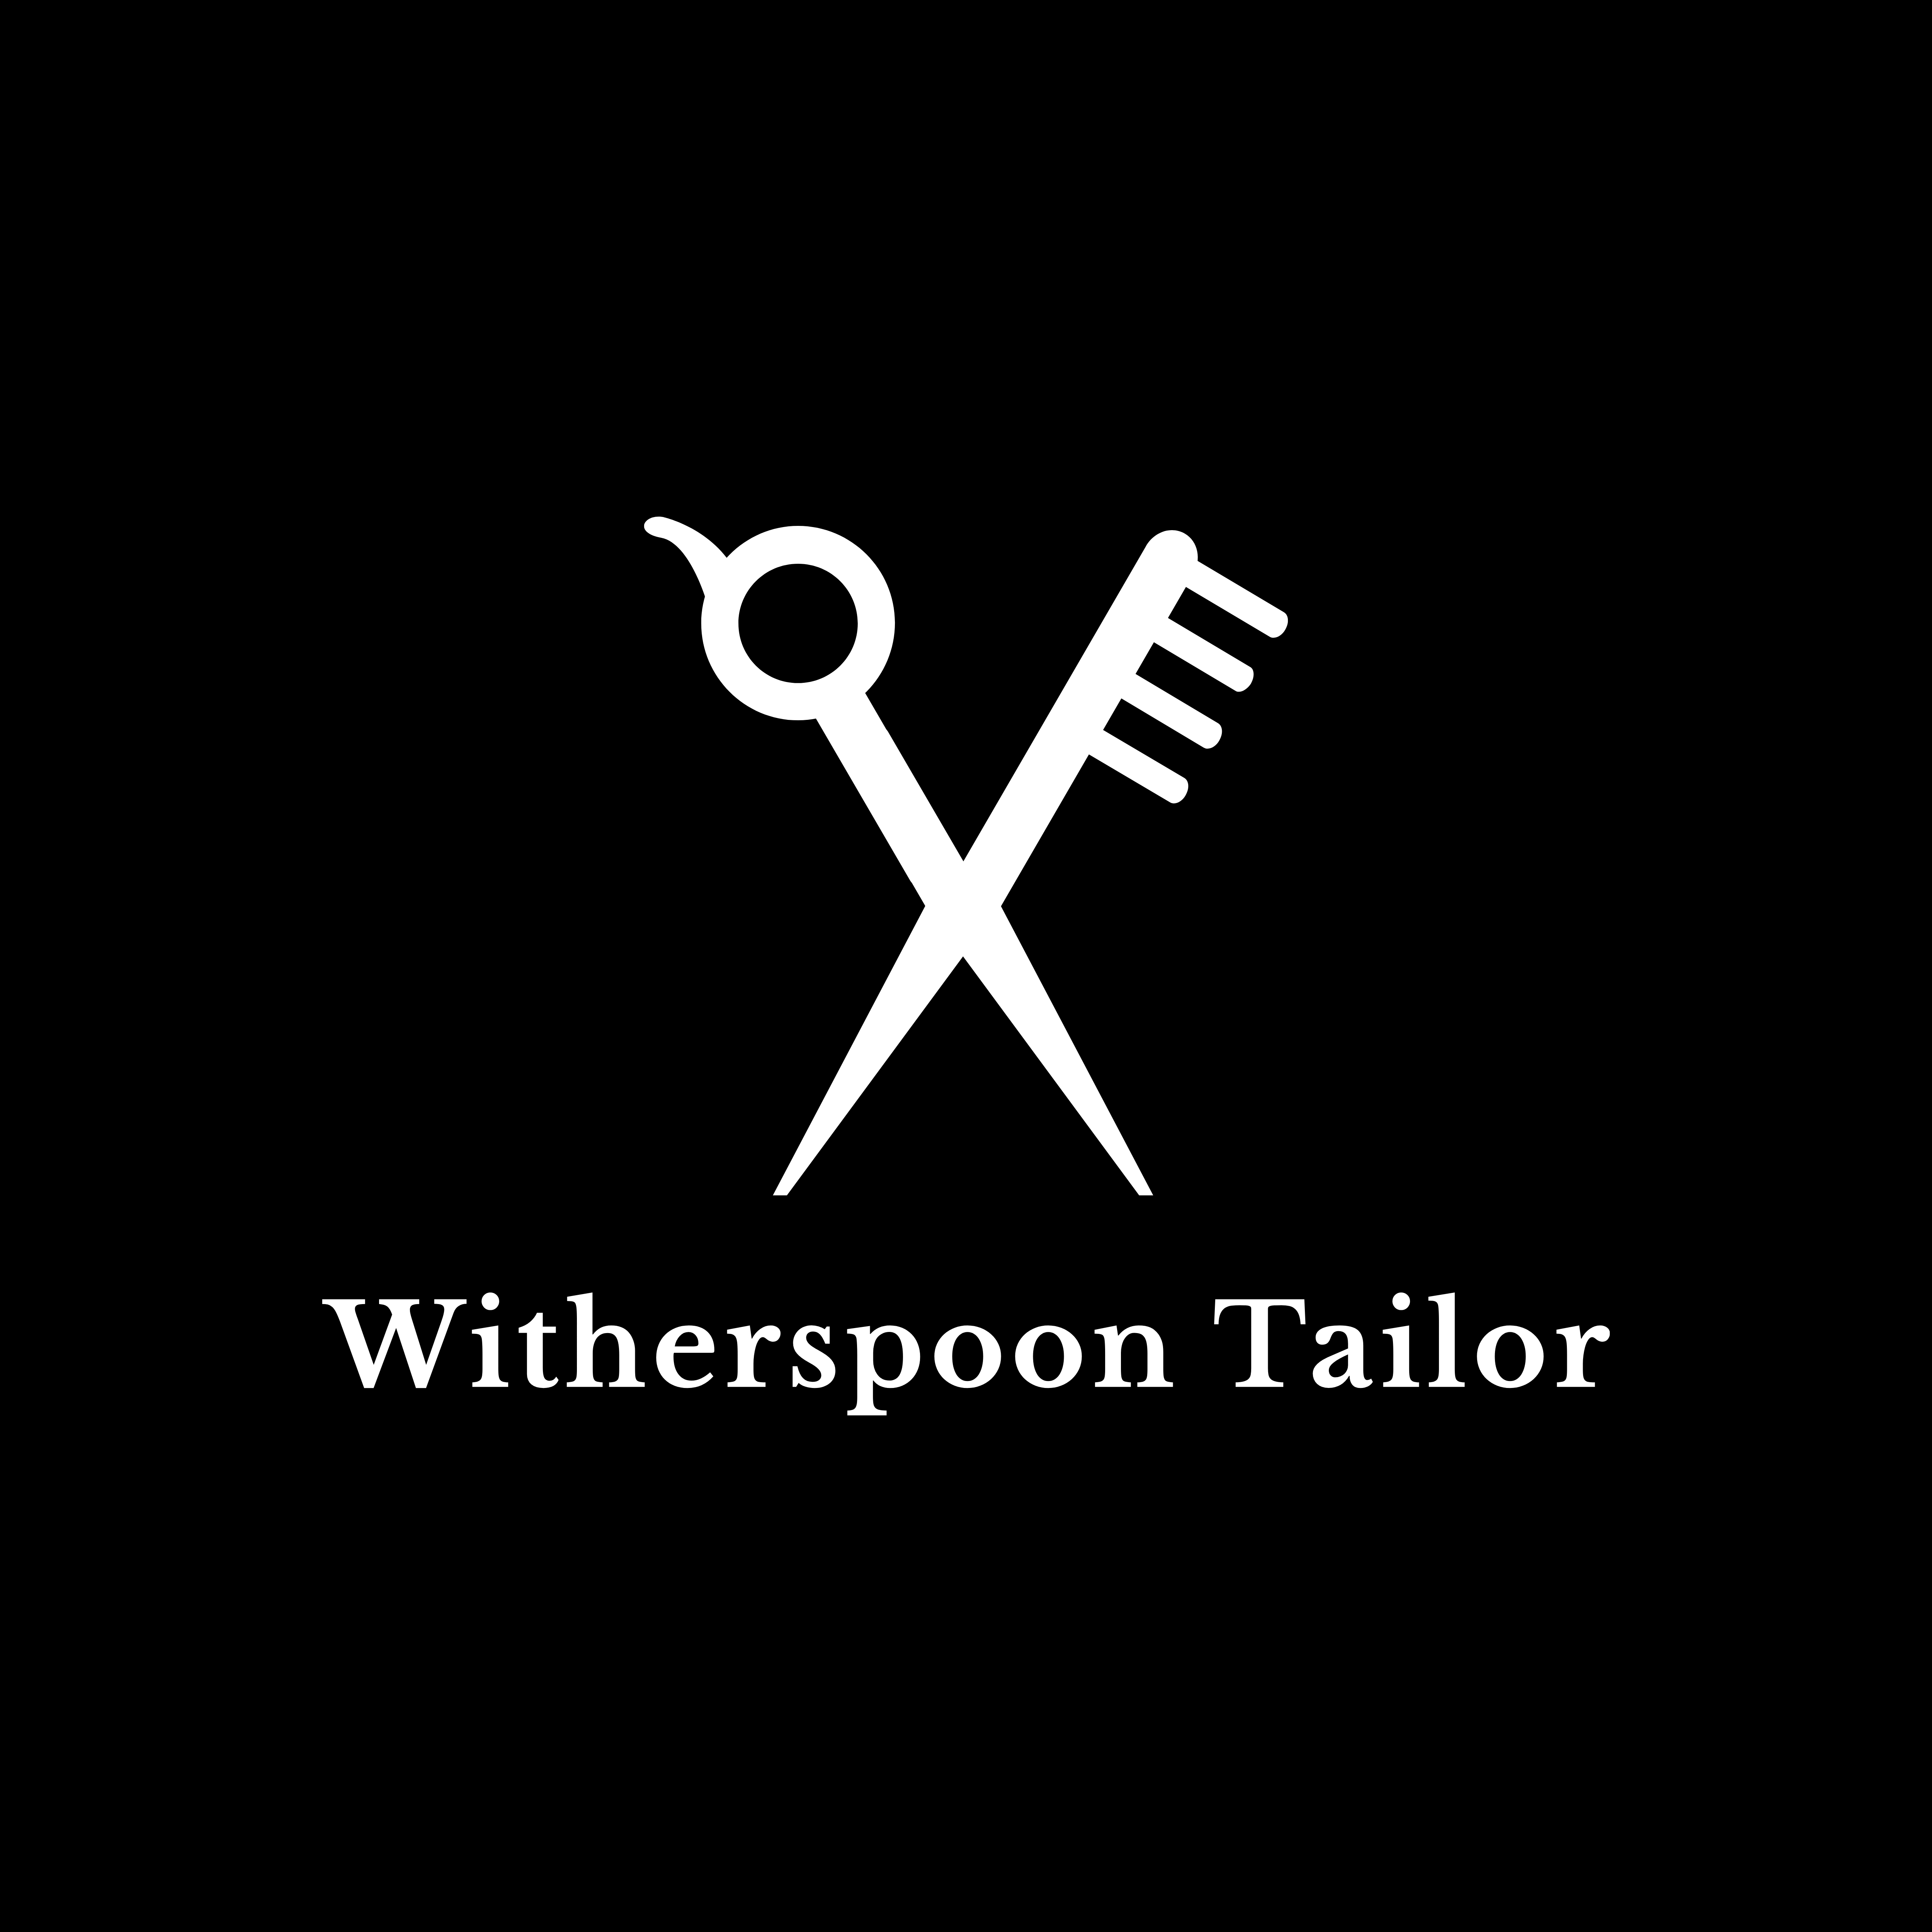 Witherspoon Tailor Logo